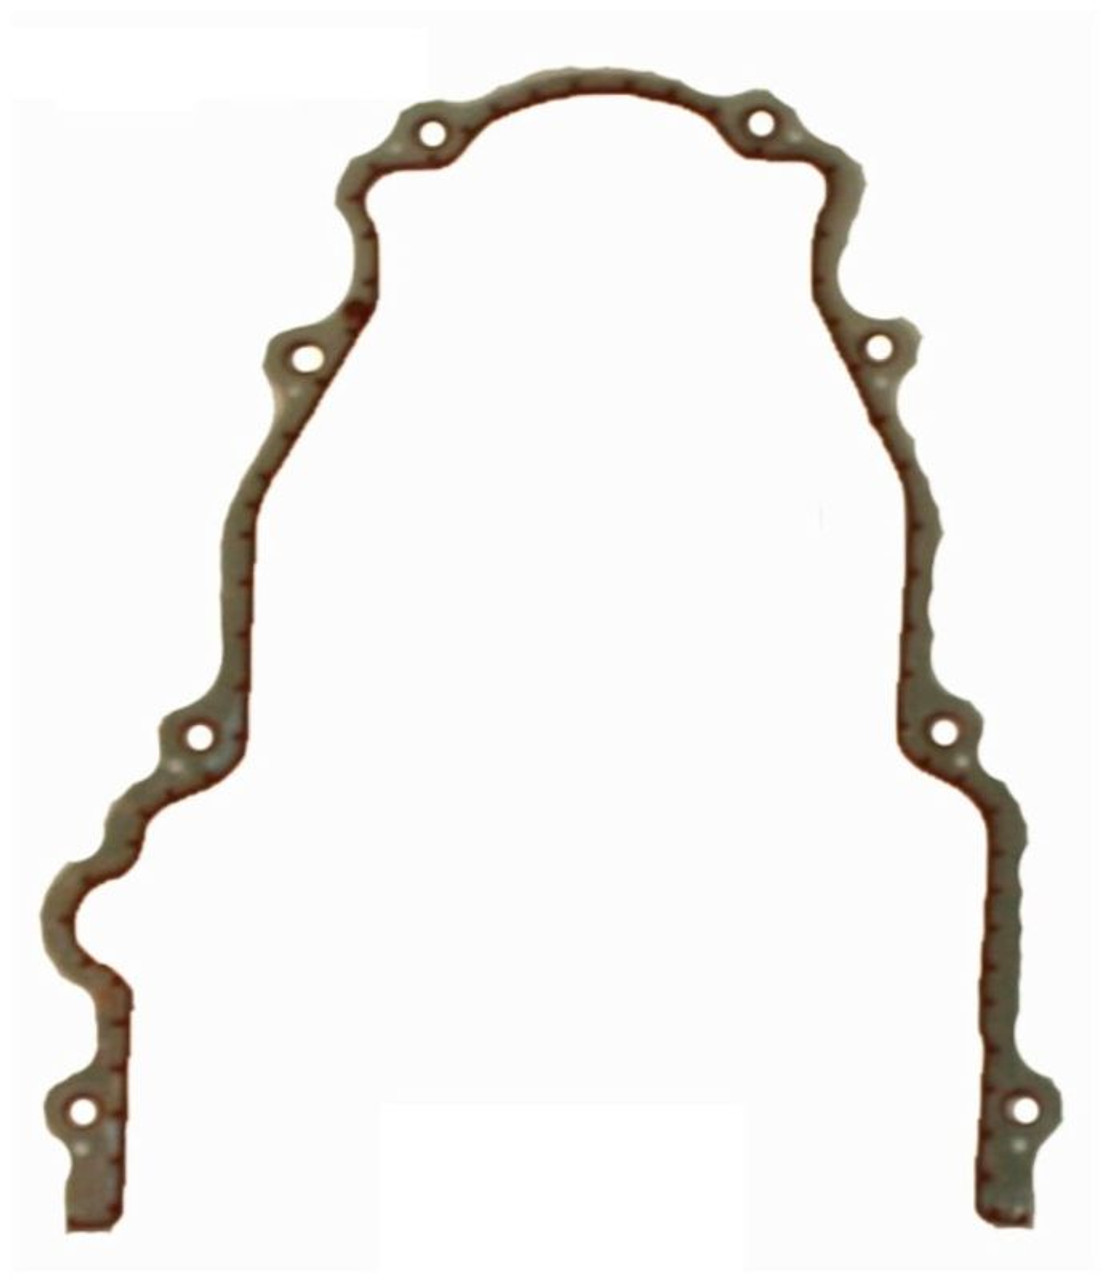 2005 Cadillac CTS 5.7L Engine Timing Cover Gasket TCG293-A -243